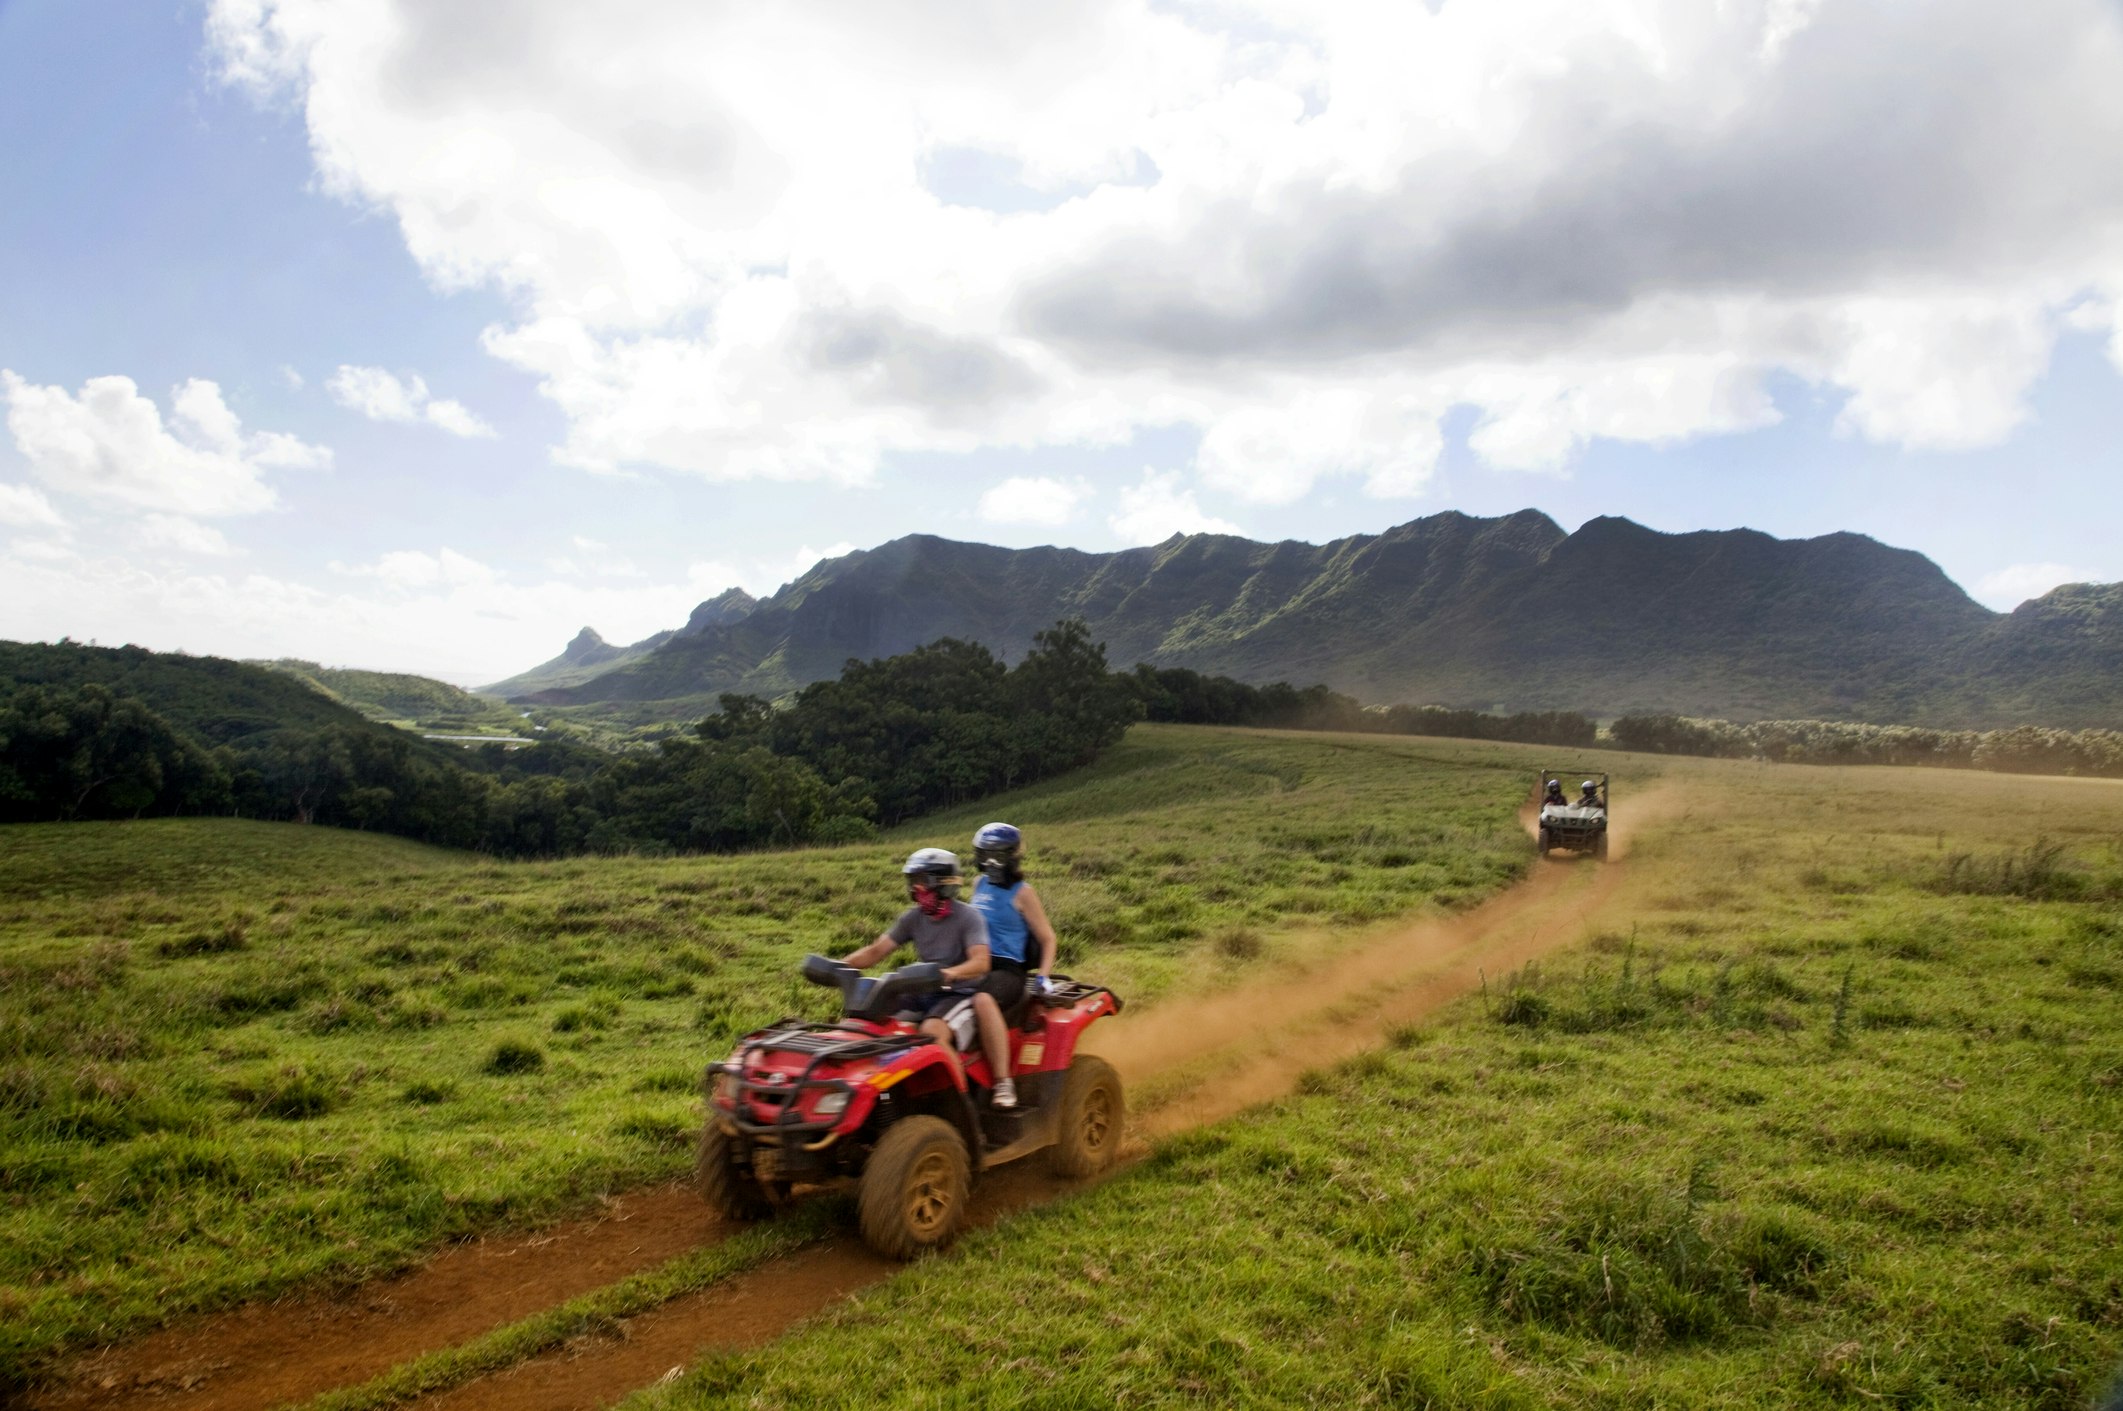 People exploring on all-terrain vehicle through a volcanic landscape